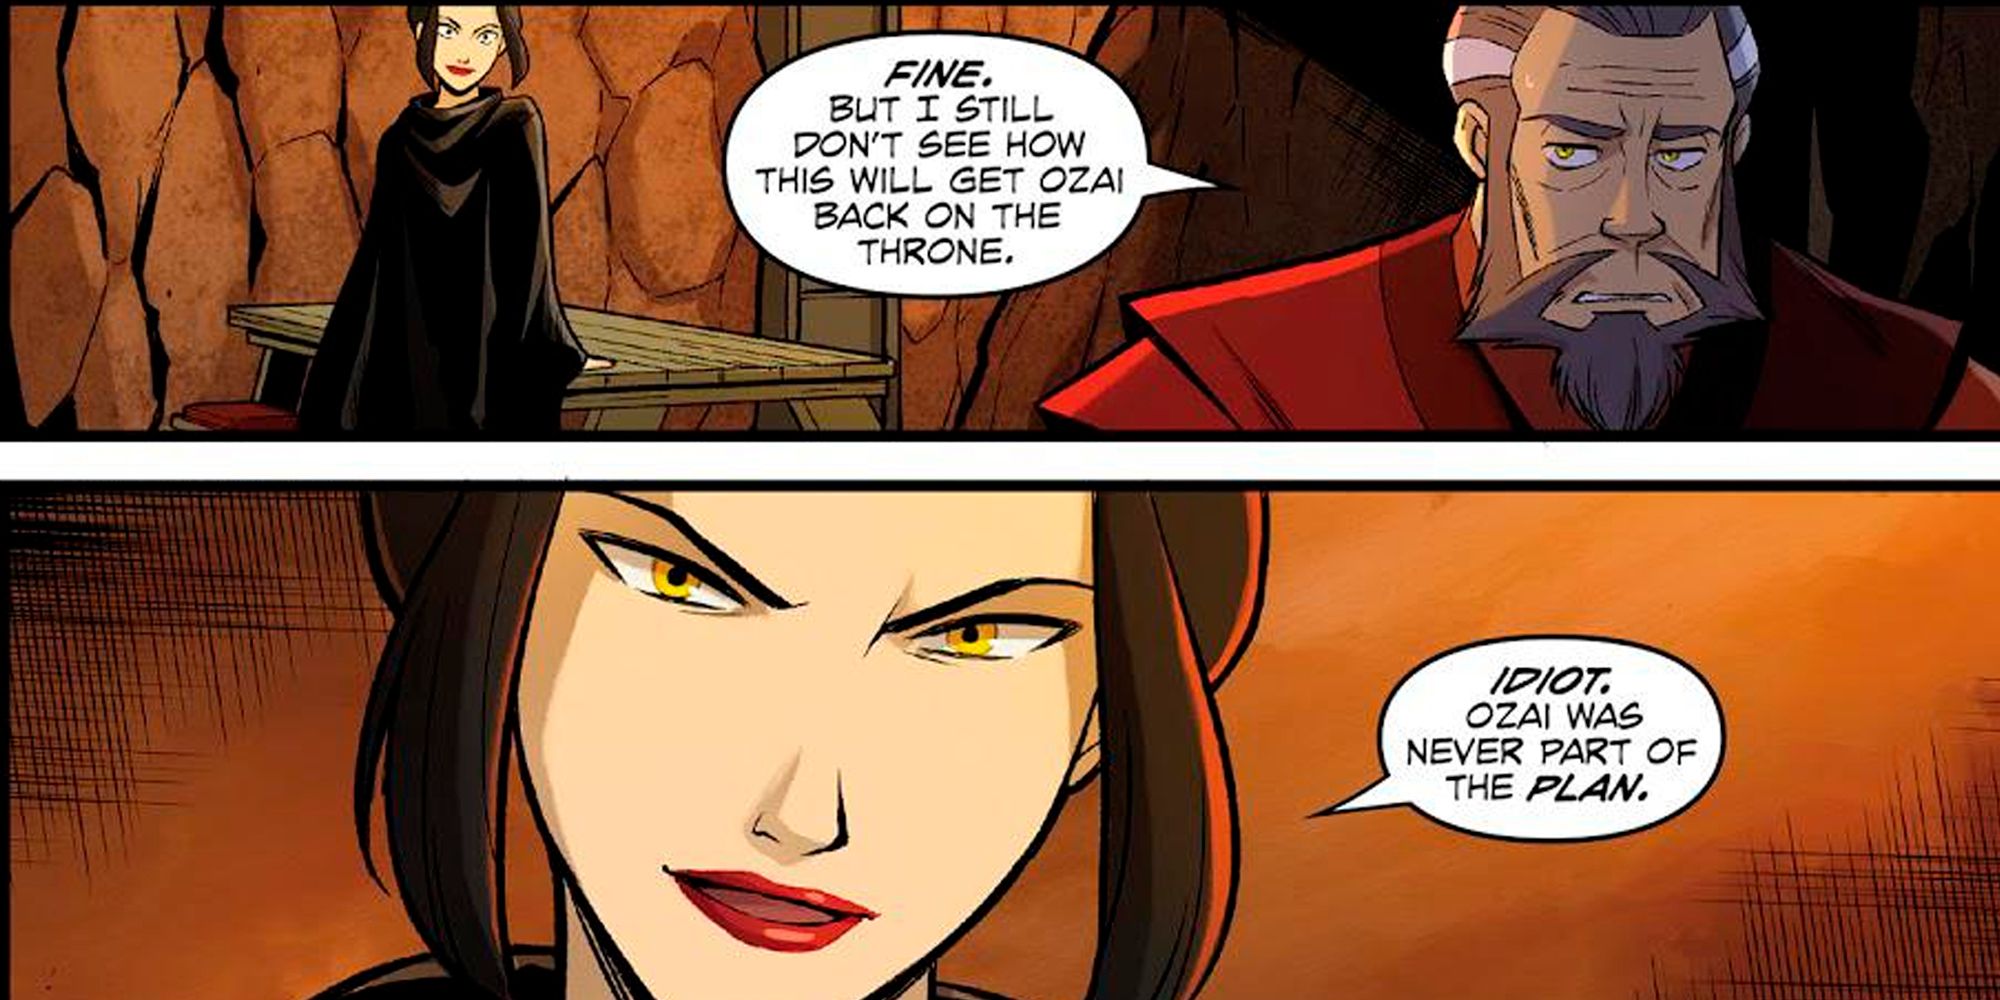 Azula speaks to one of Ozai's supporters in the Avatar Smoke And Shadow comic book